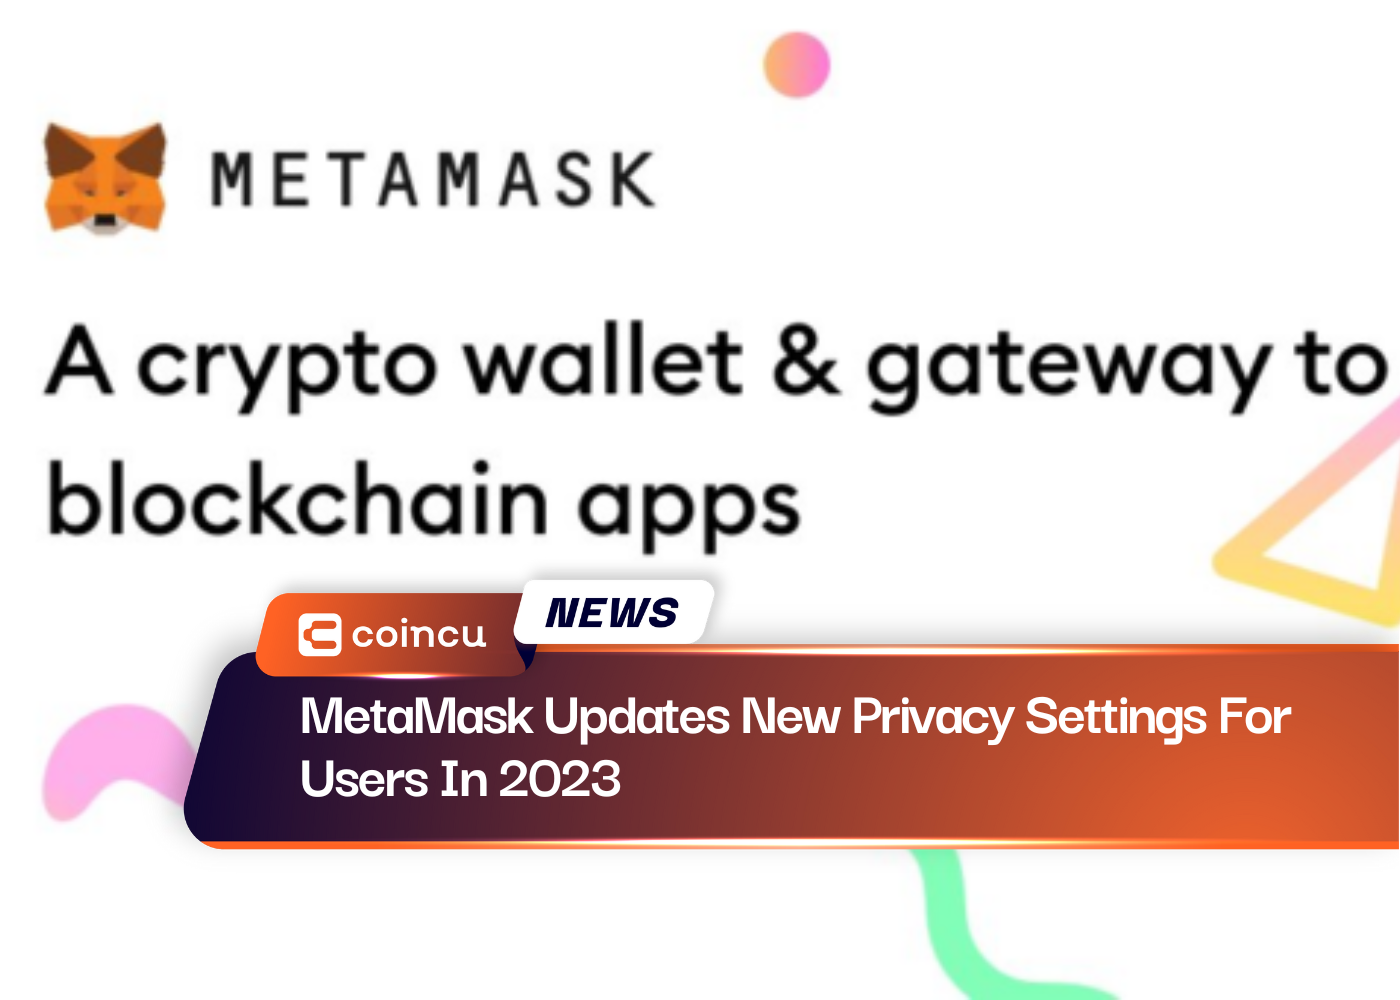 MetaMask Updates New Privacy Settings For Users In 2023